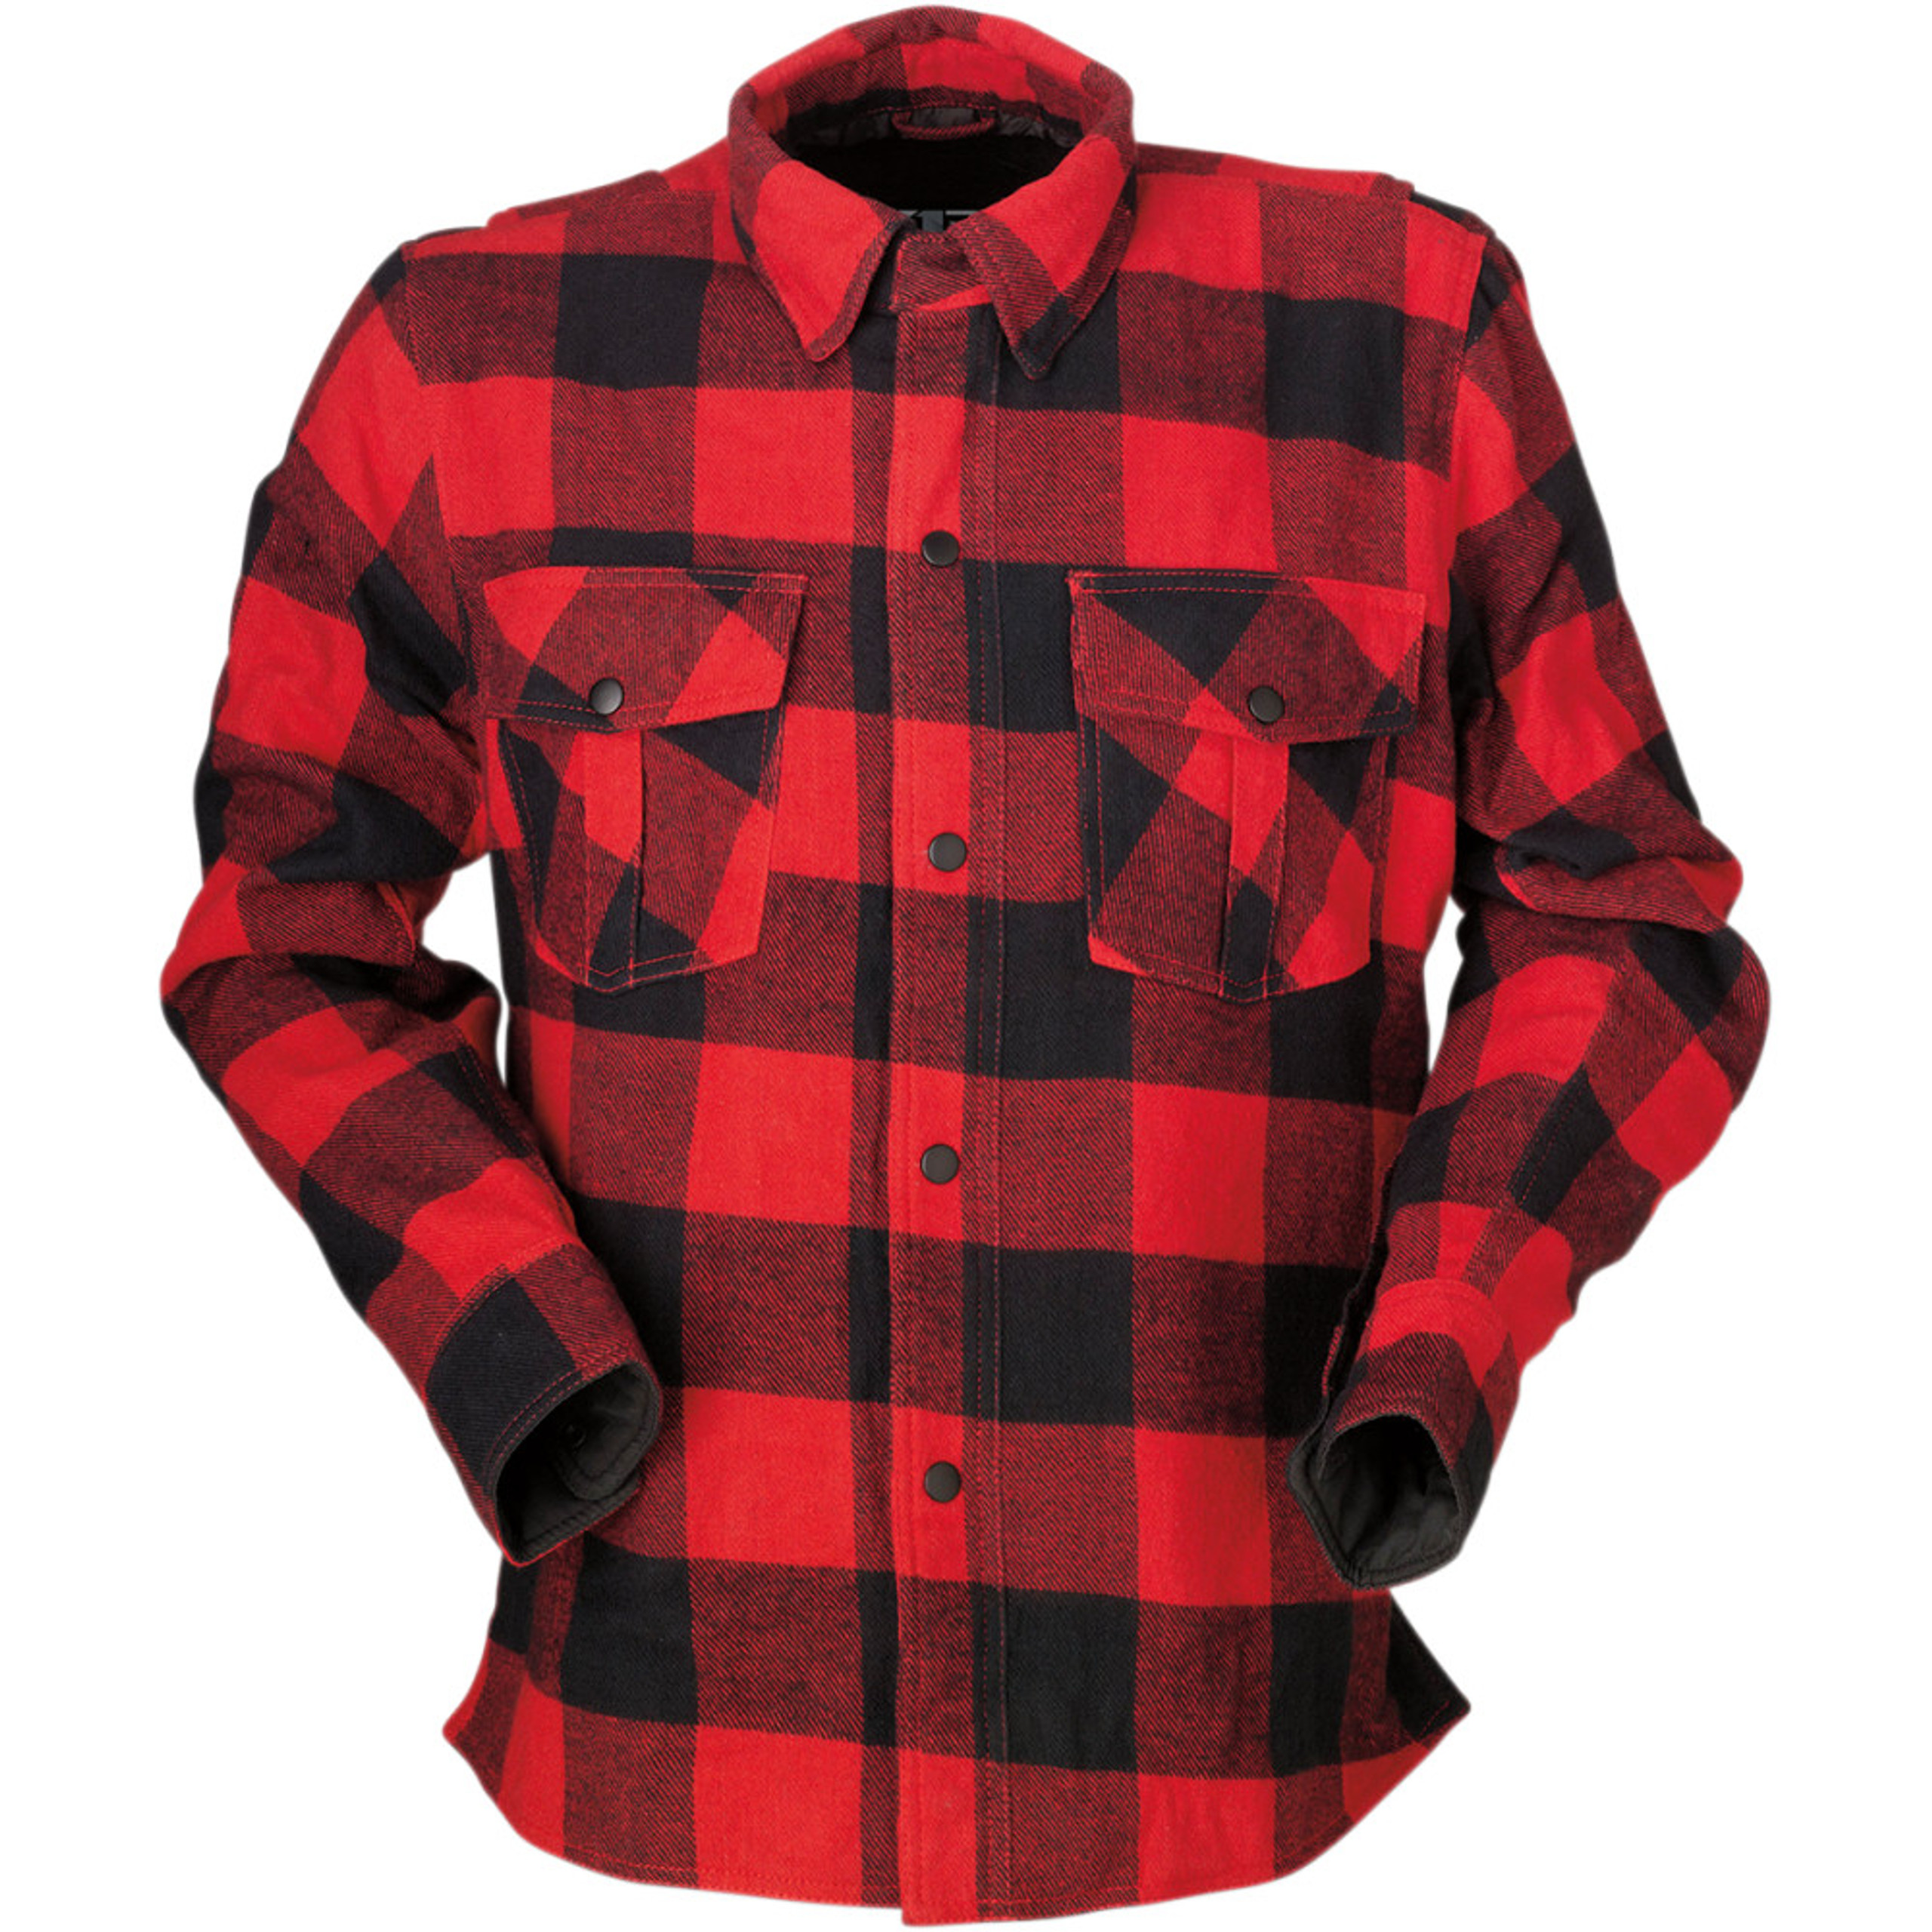 Motorcycle Flannels - Get Lowered Cycles